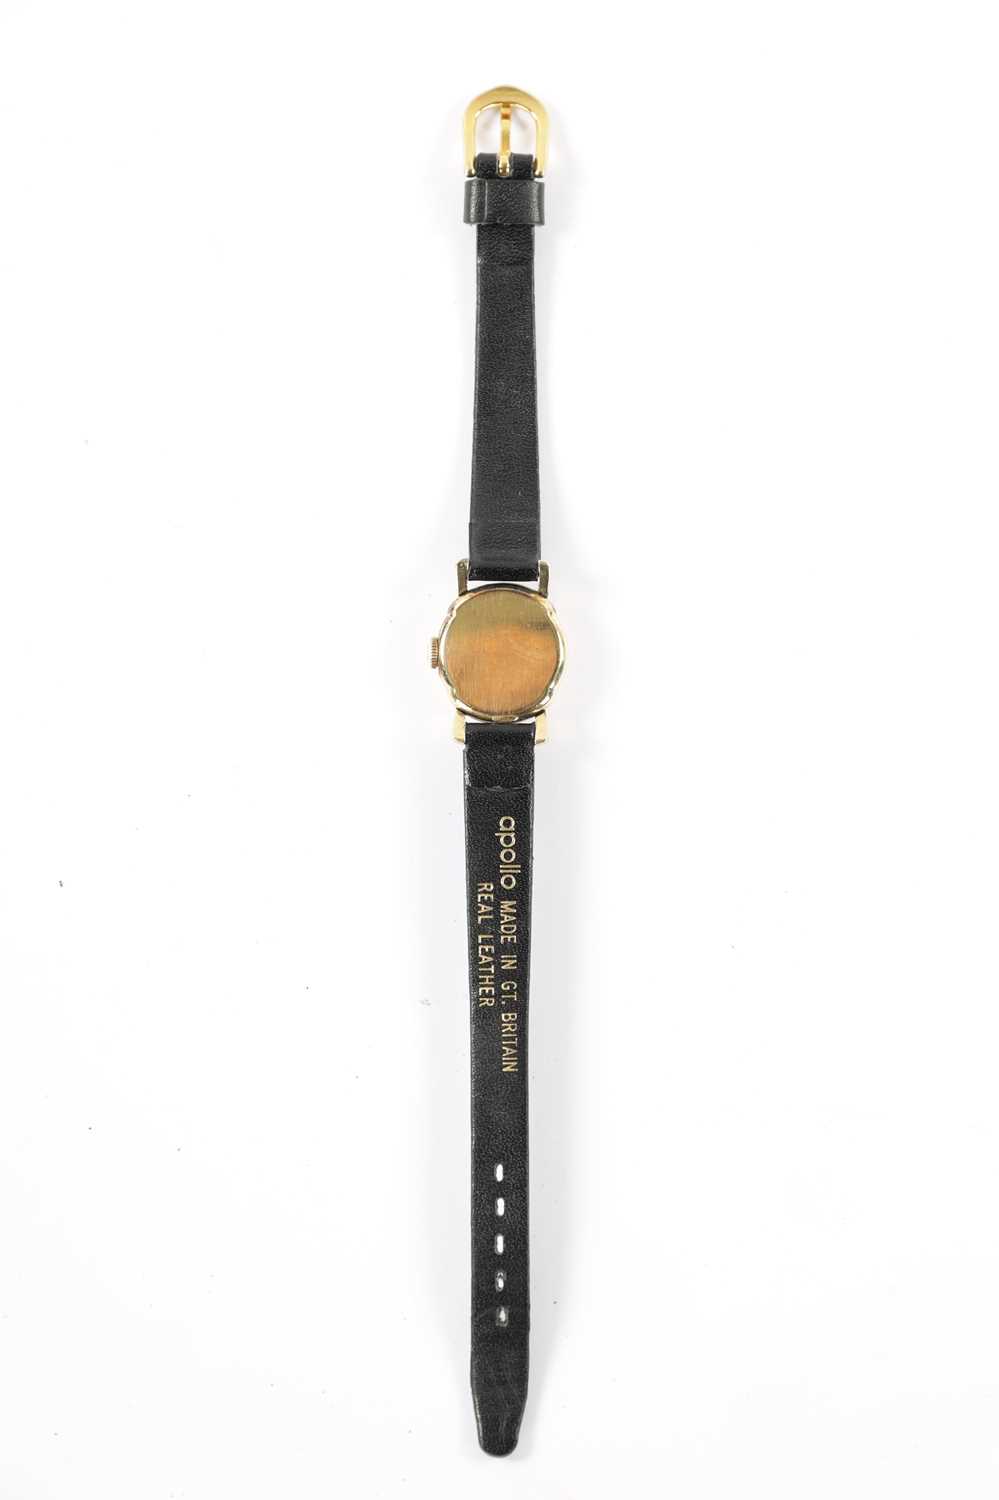 A LADIES OMEGA WRISTWATCH - Image 4 of 7